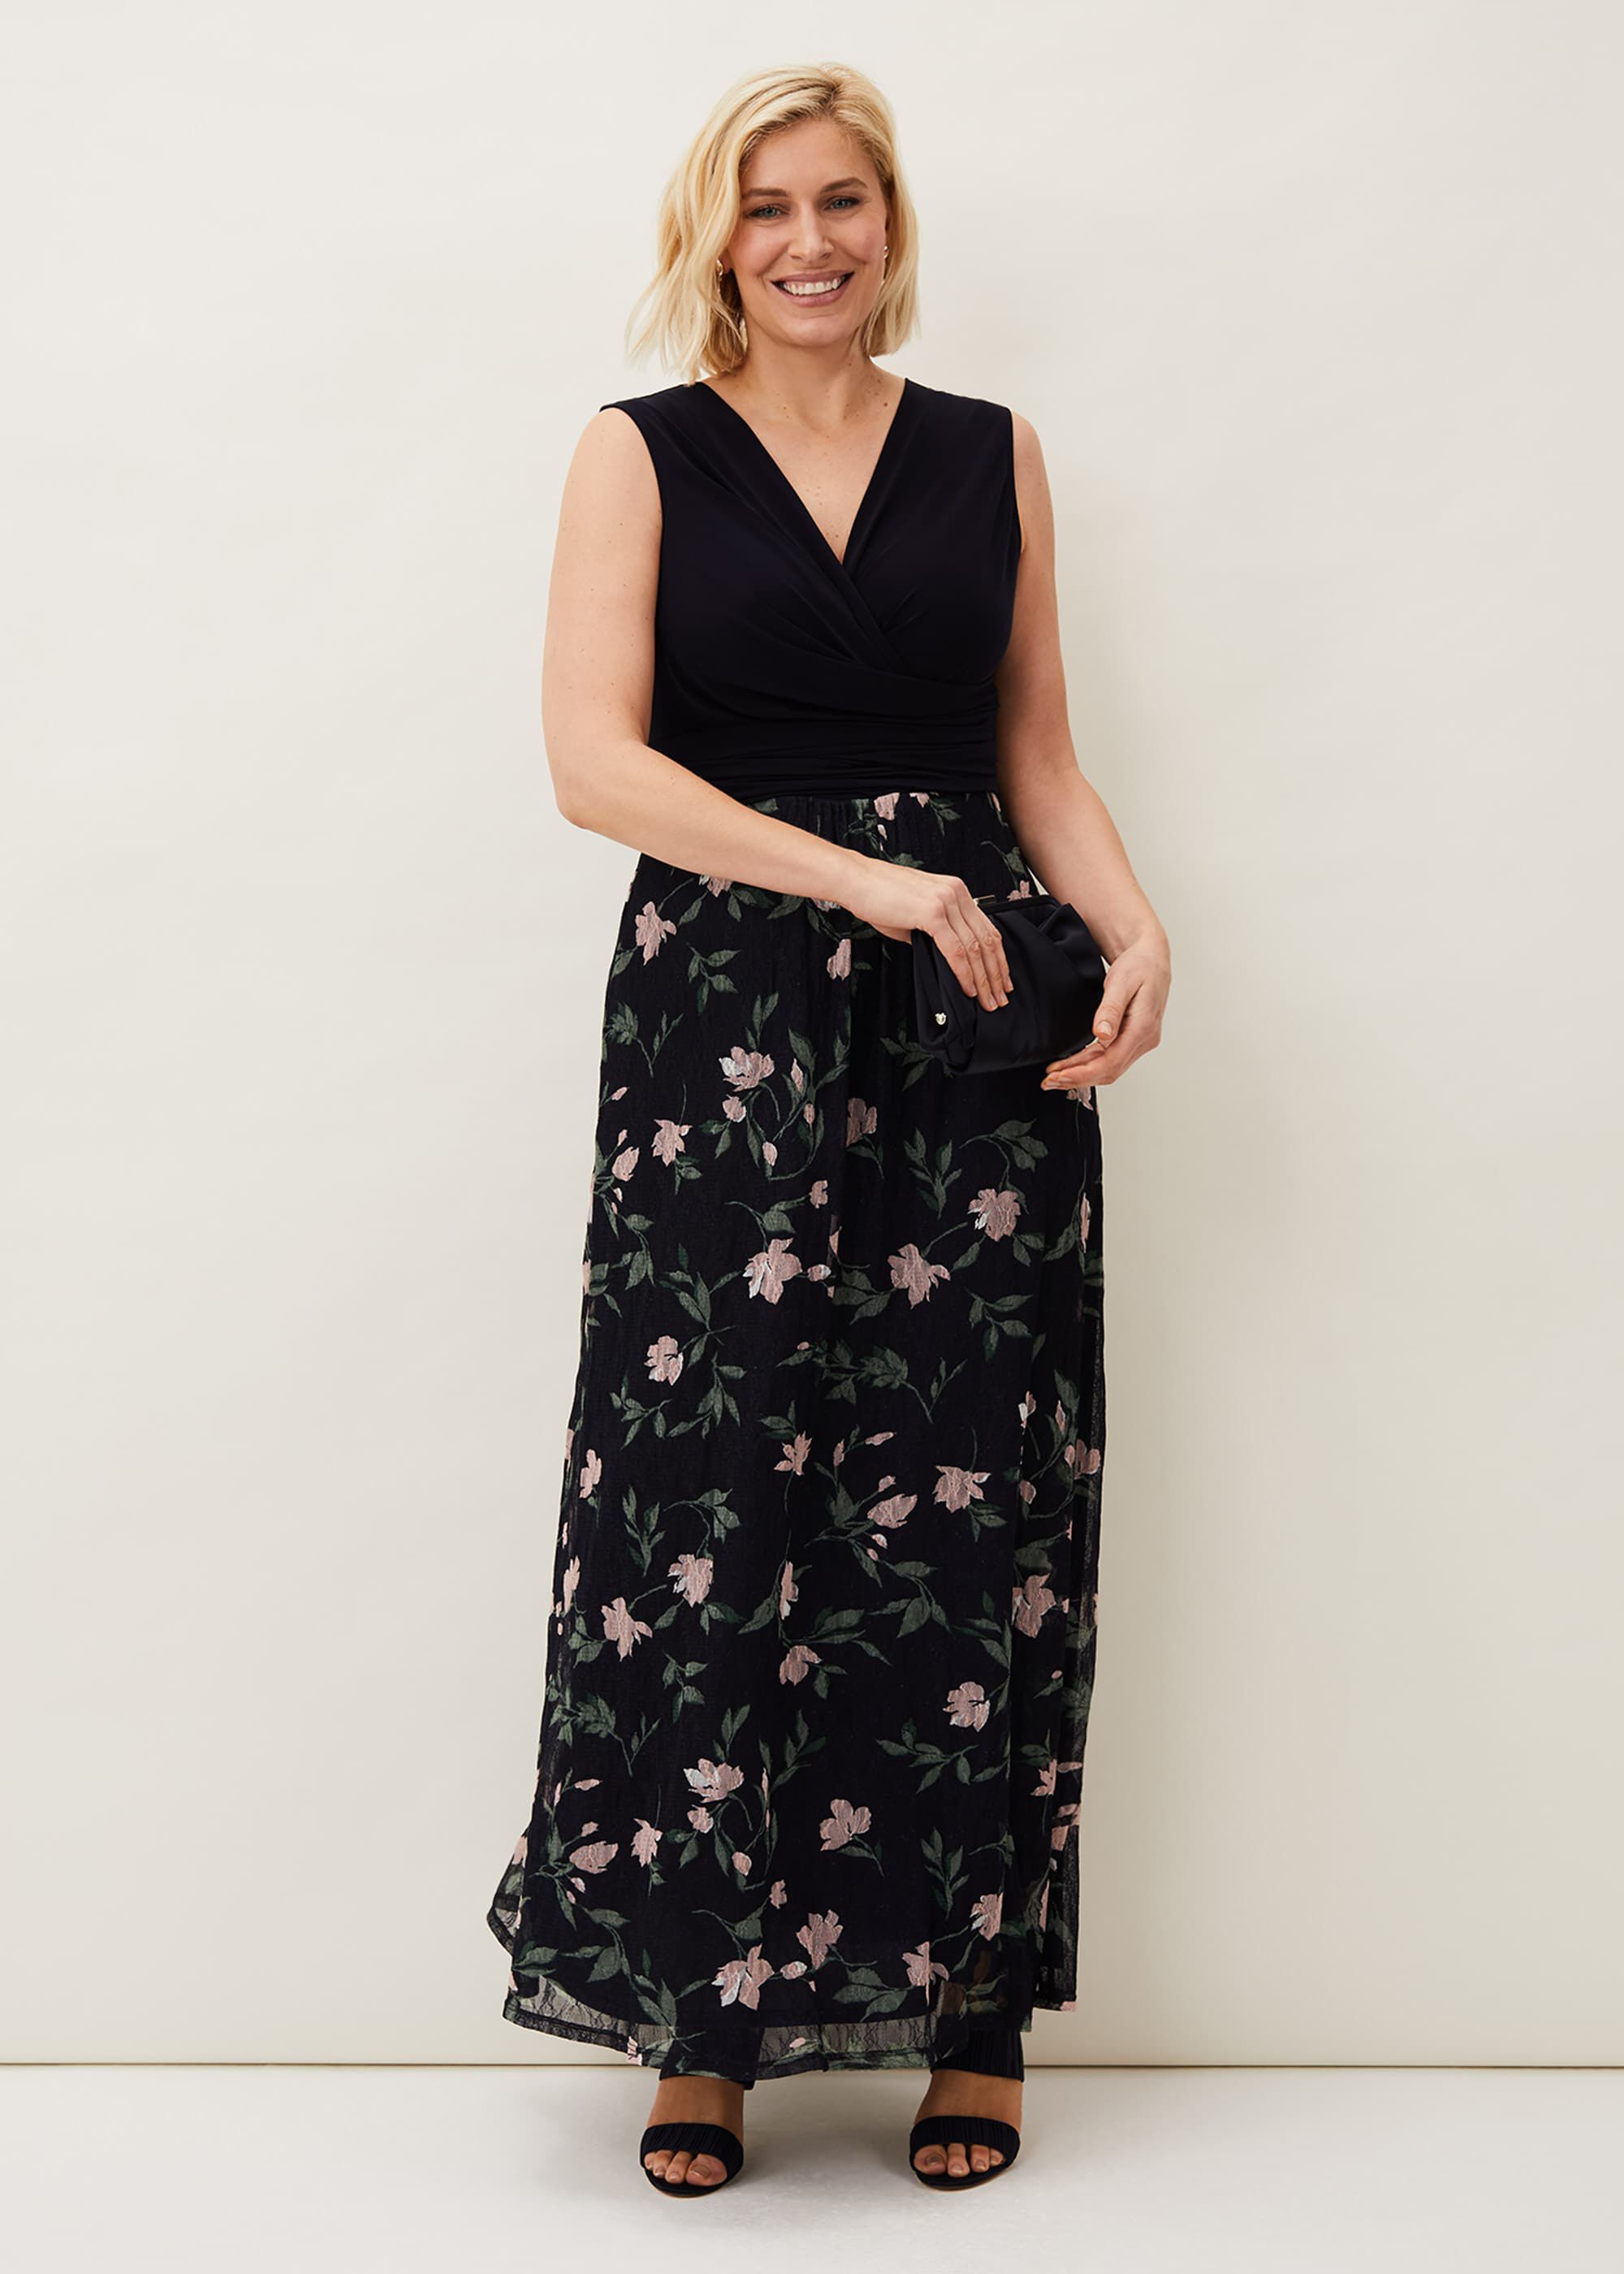 floral occasion maxi dress